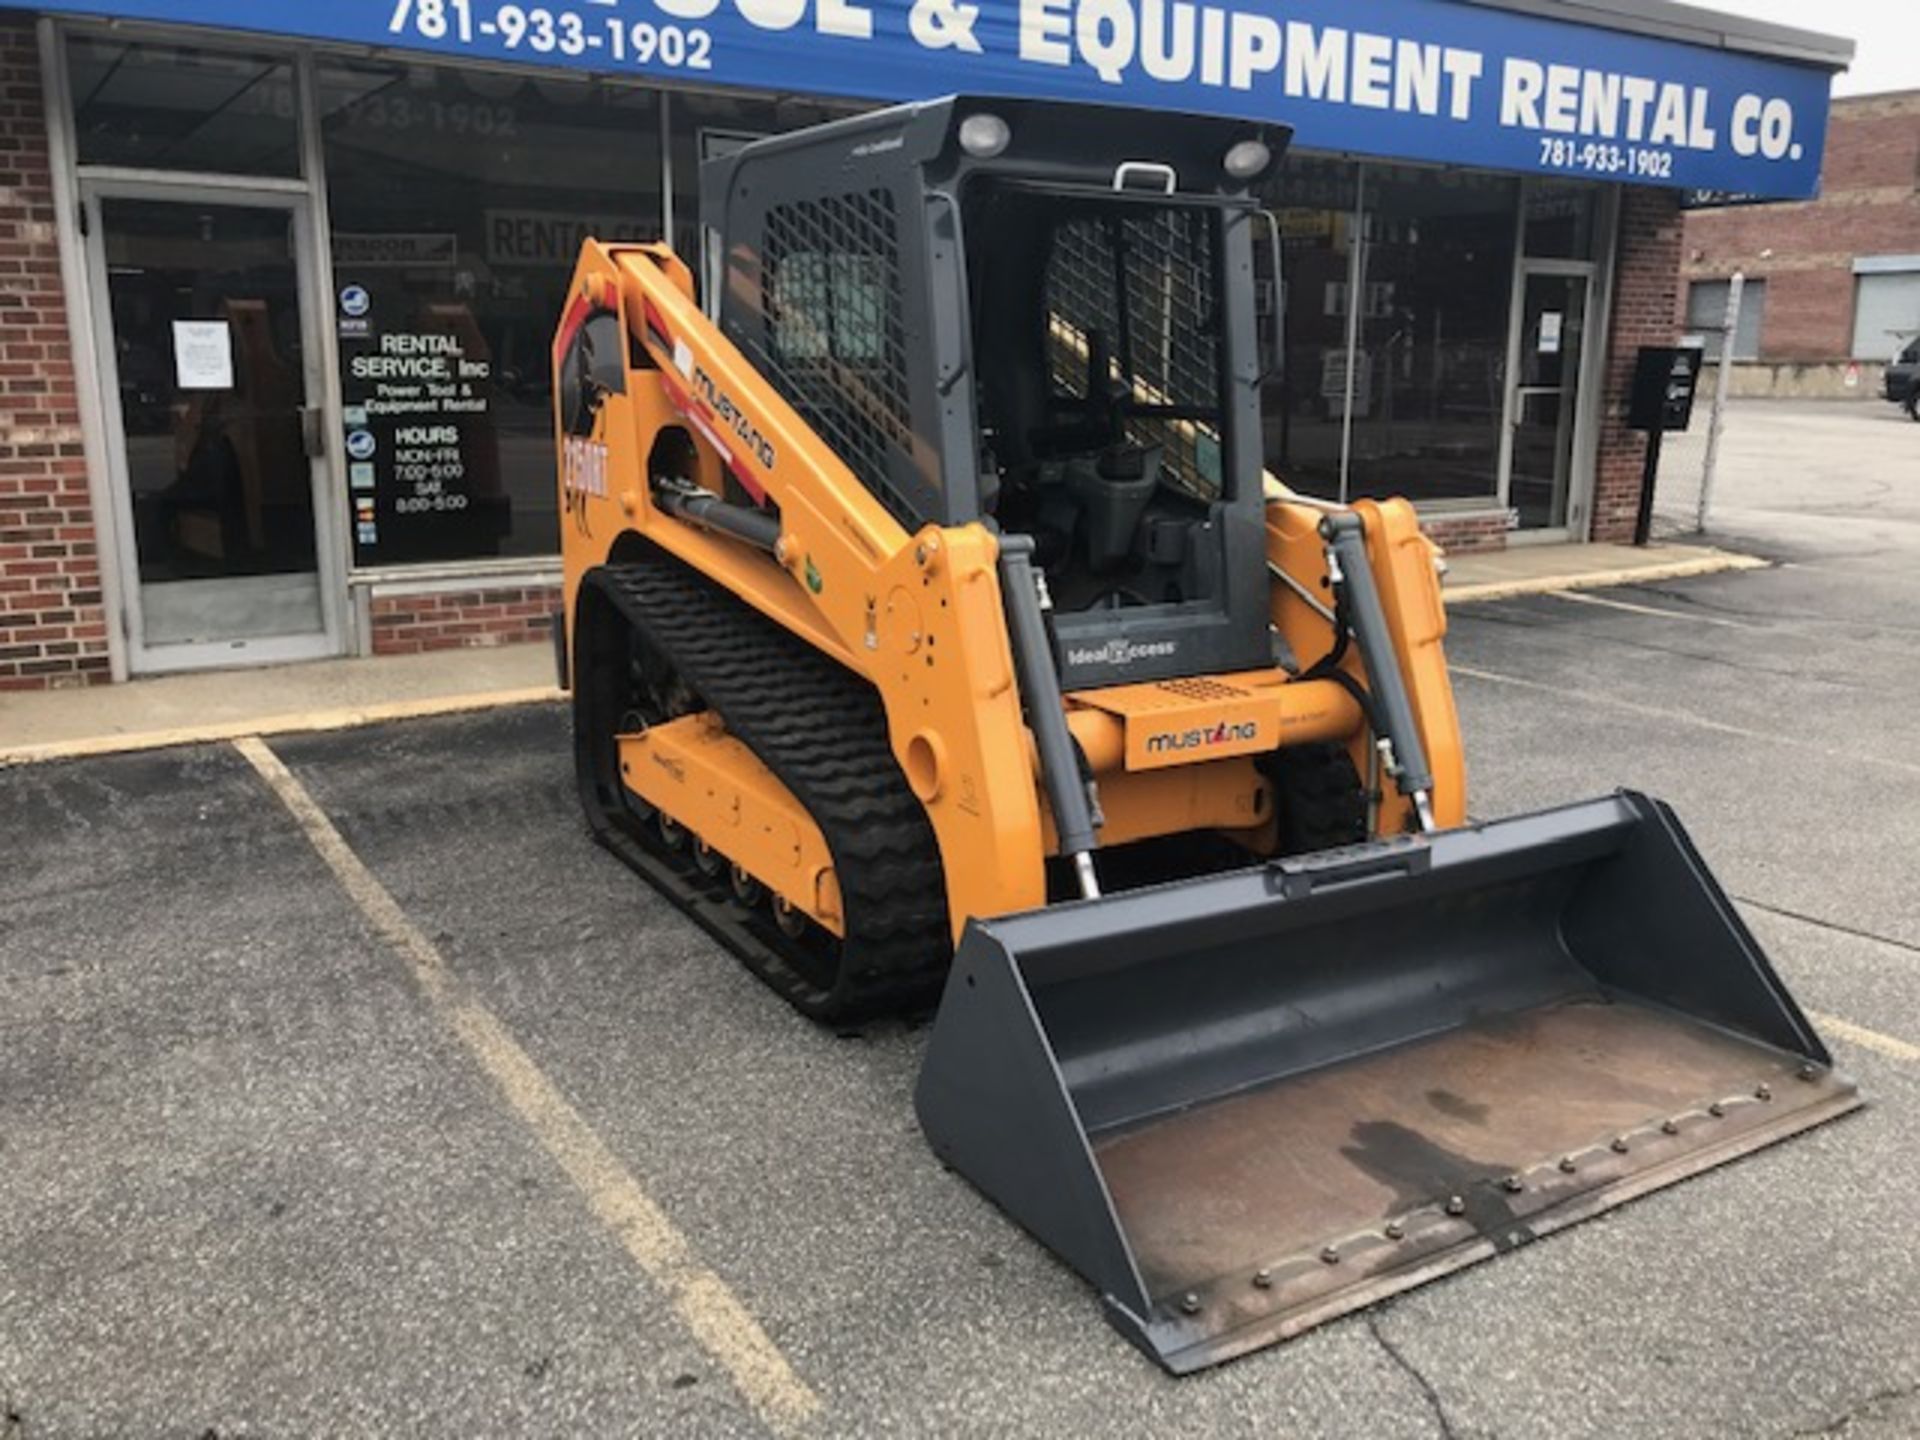 2018 MUSTANG TRACK SKID STEER #2150RT LOADER, HOURS 187, DELUXE AIR RIDE SUSPENSION, HEAT, A/C, SELF